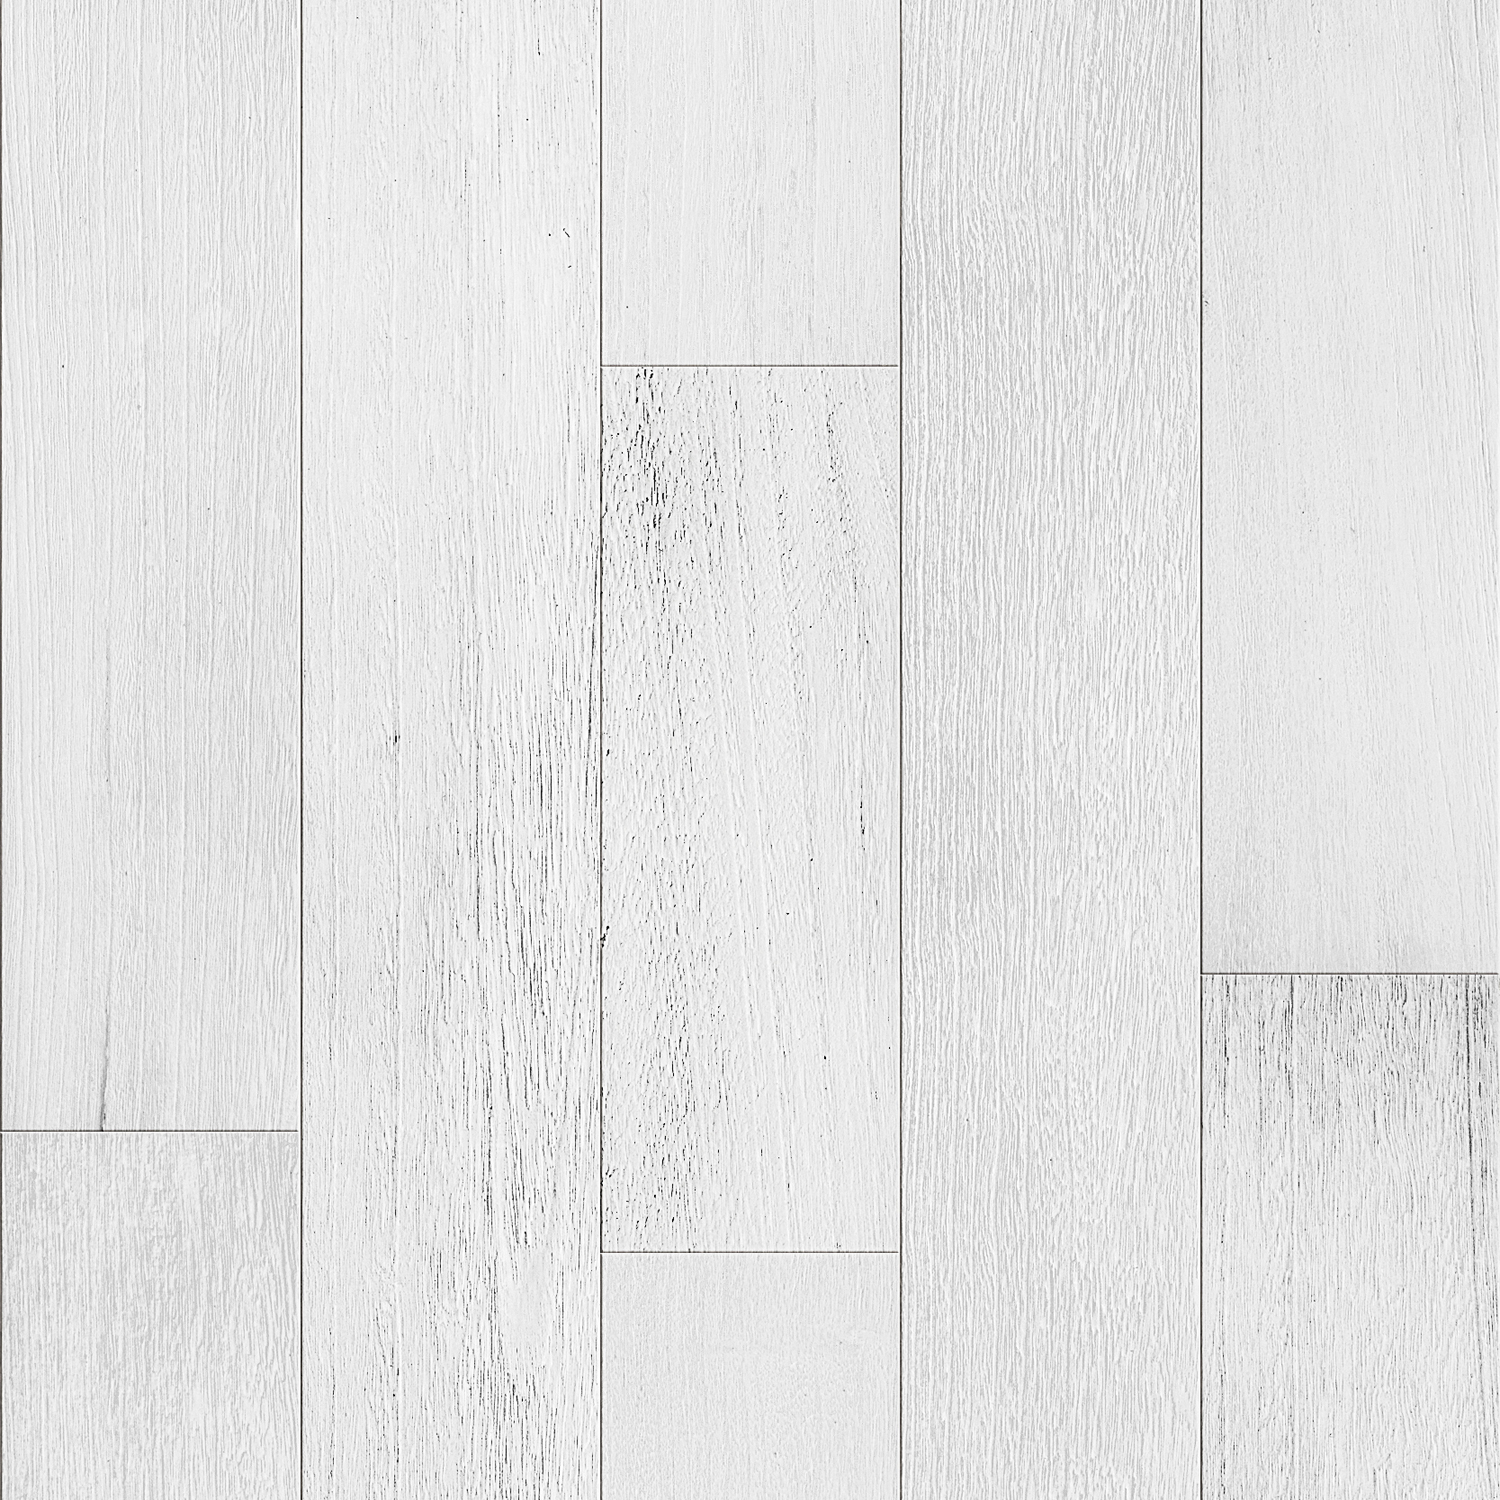 A15501 -Art3d Peel and Stick Reclaimed Barn Wood Planks for Wall, White-Washed (16 Sq Ft)